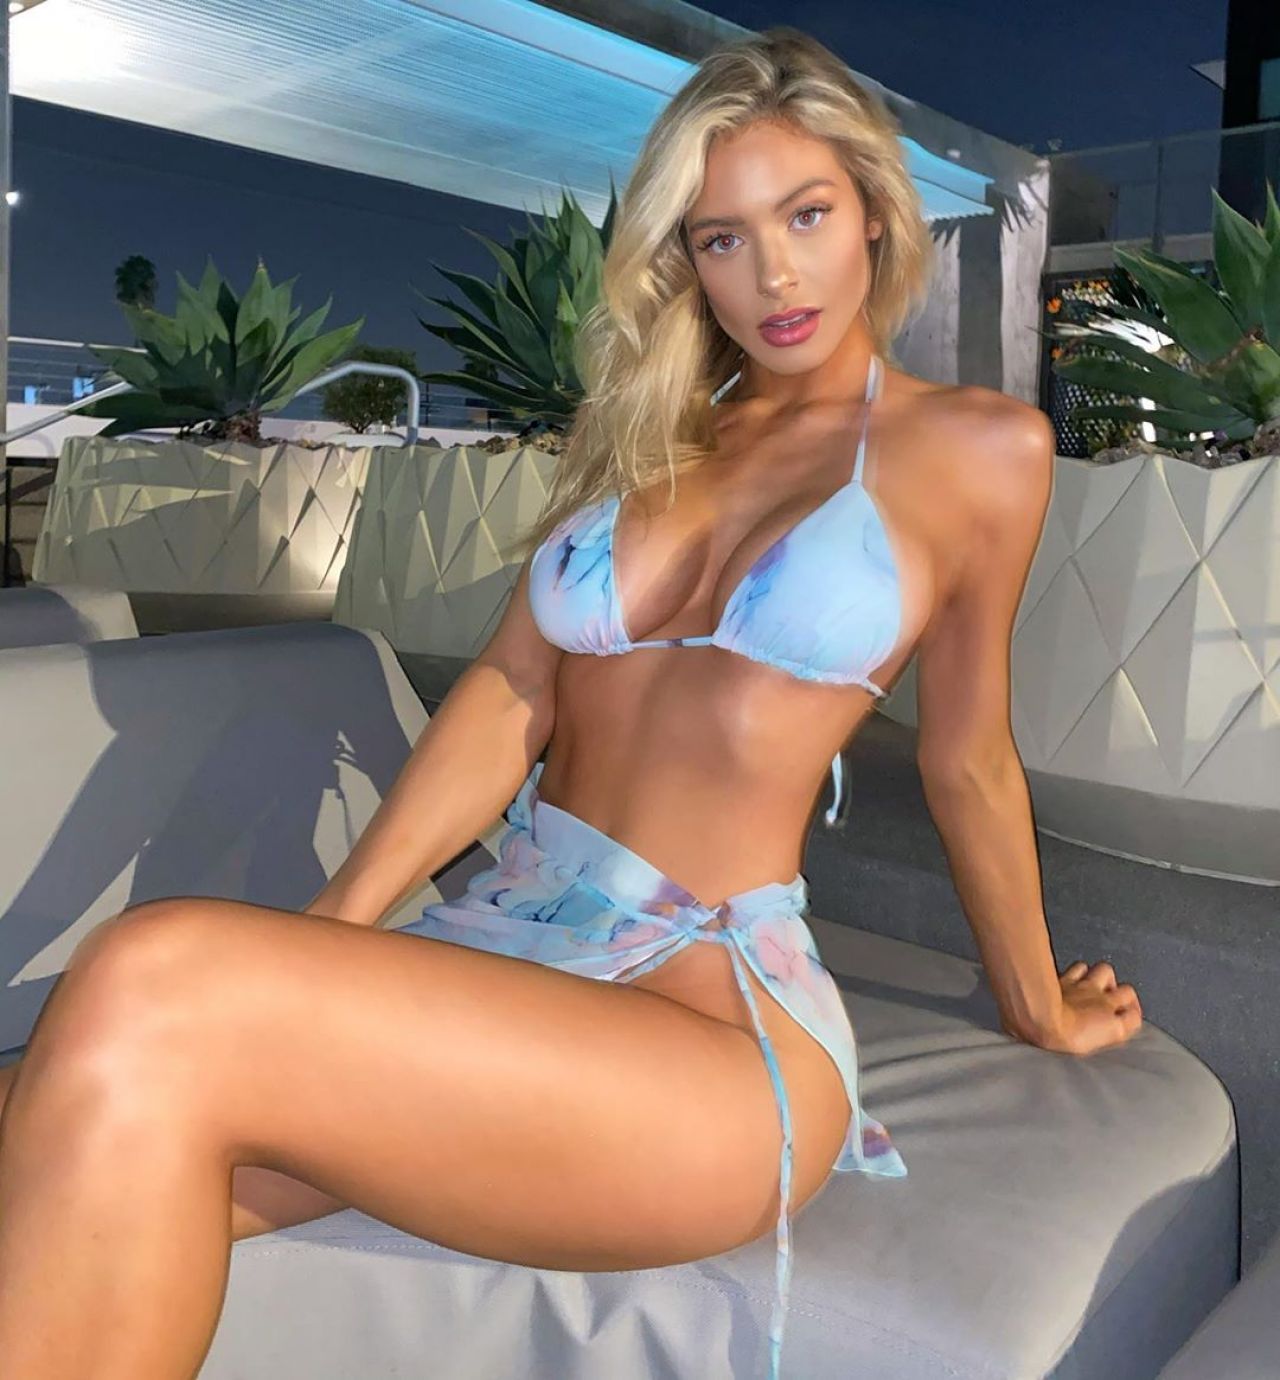 Hannah Palmer's annual salary is projected to be $1.46 million. Hannah Palmer's earnings are regularly questioned by her fans. Hannah Palmer's Instagram profile page now has 1.6 million followers. In comparison, the average Instagram user has 150 followers.